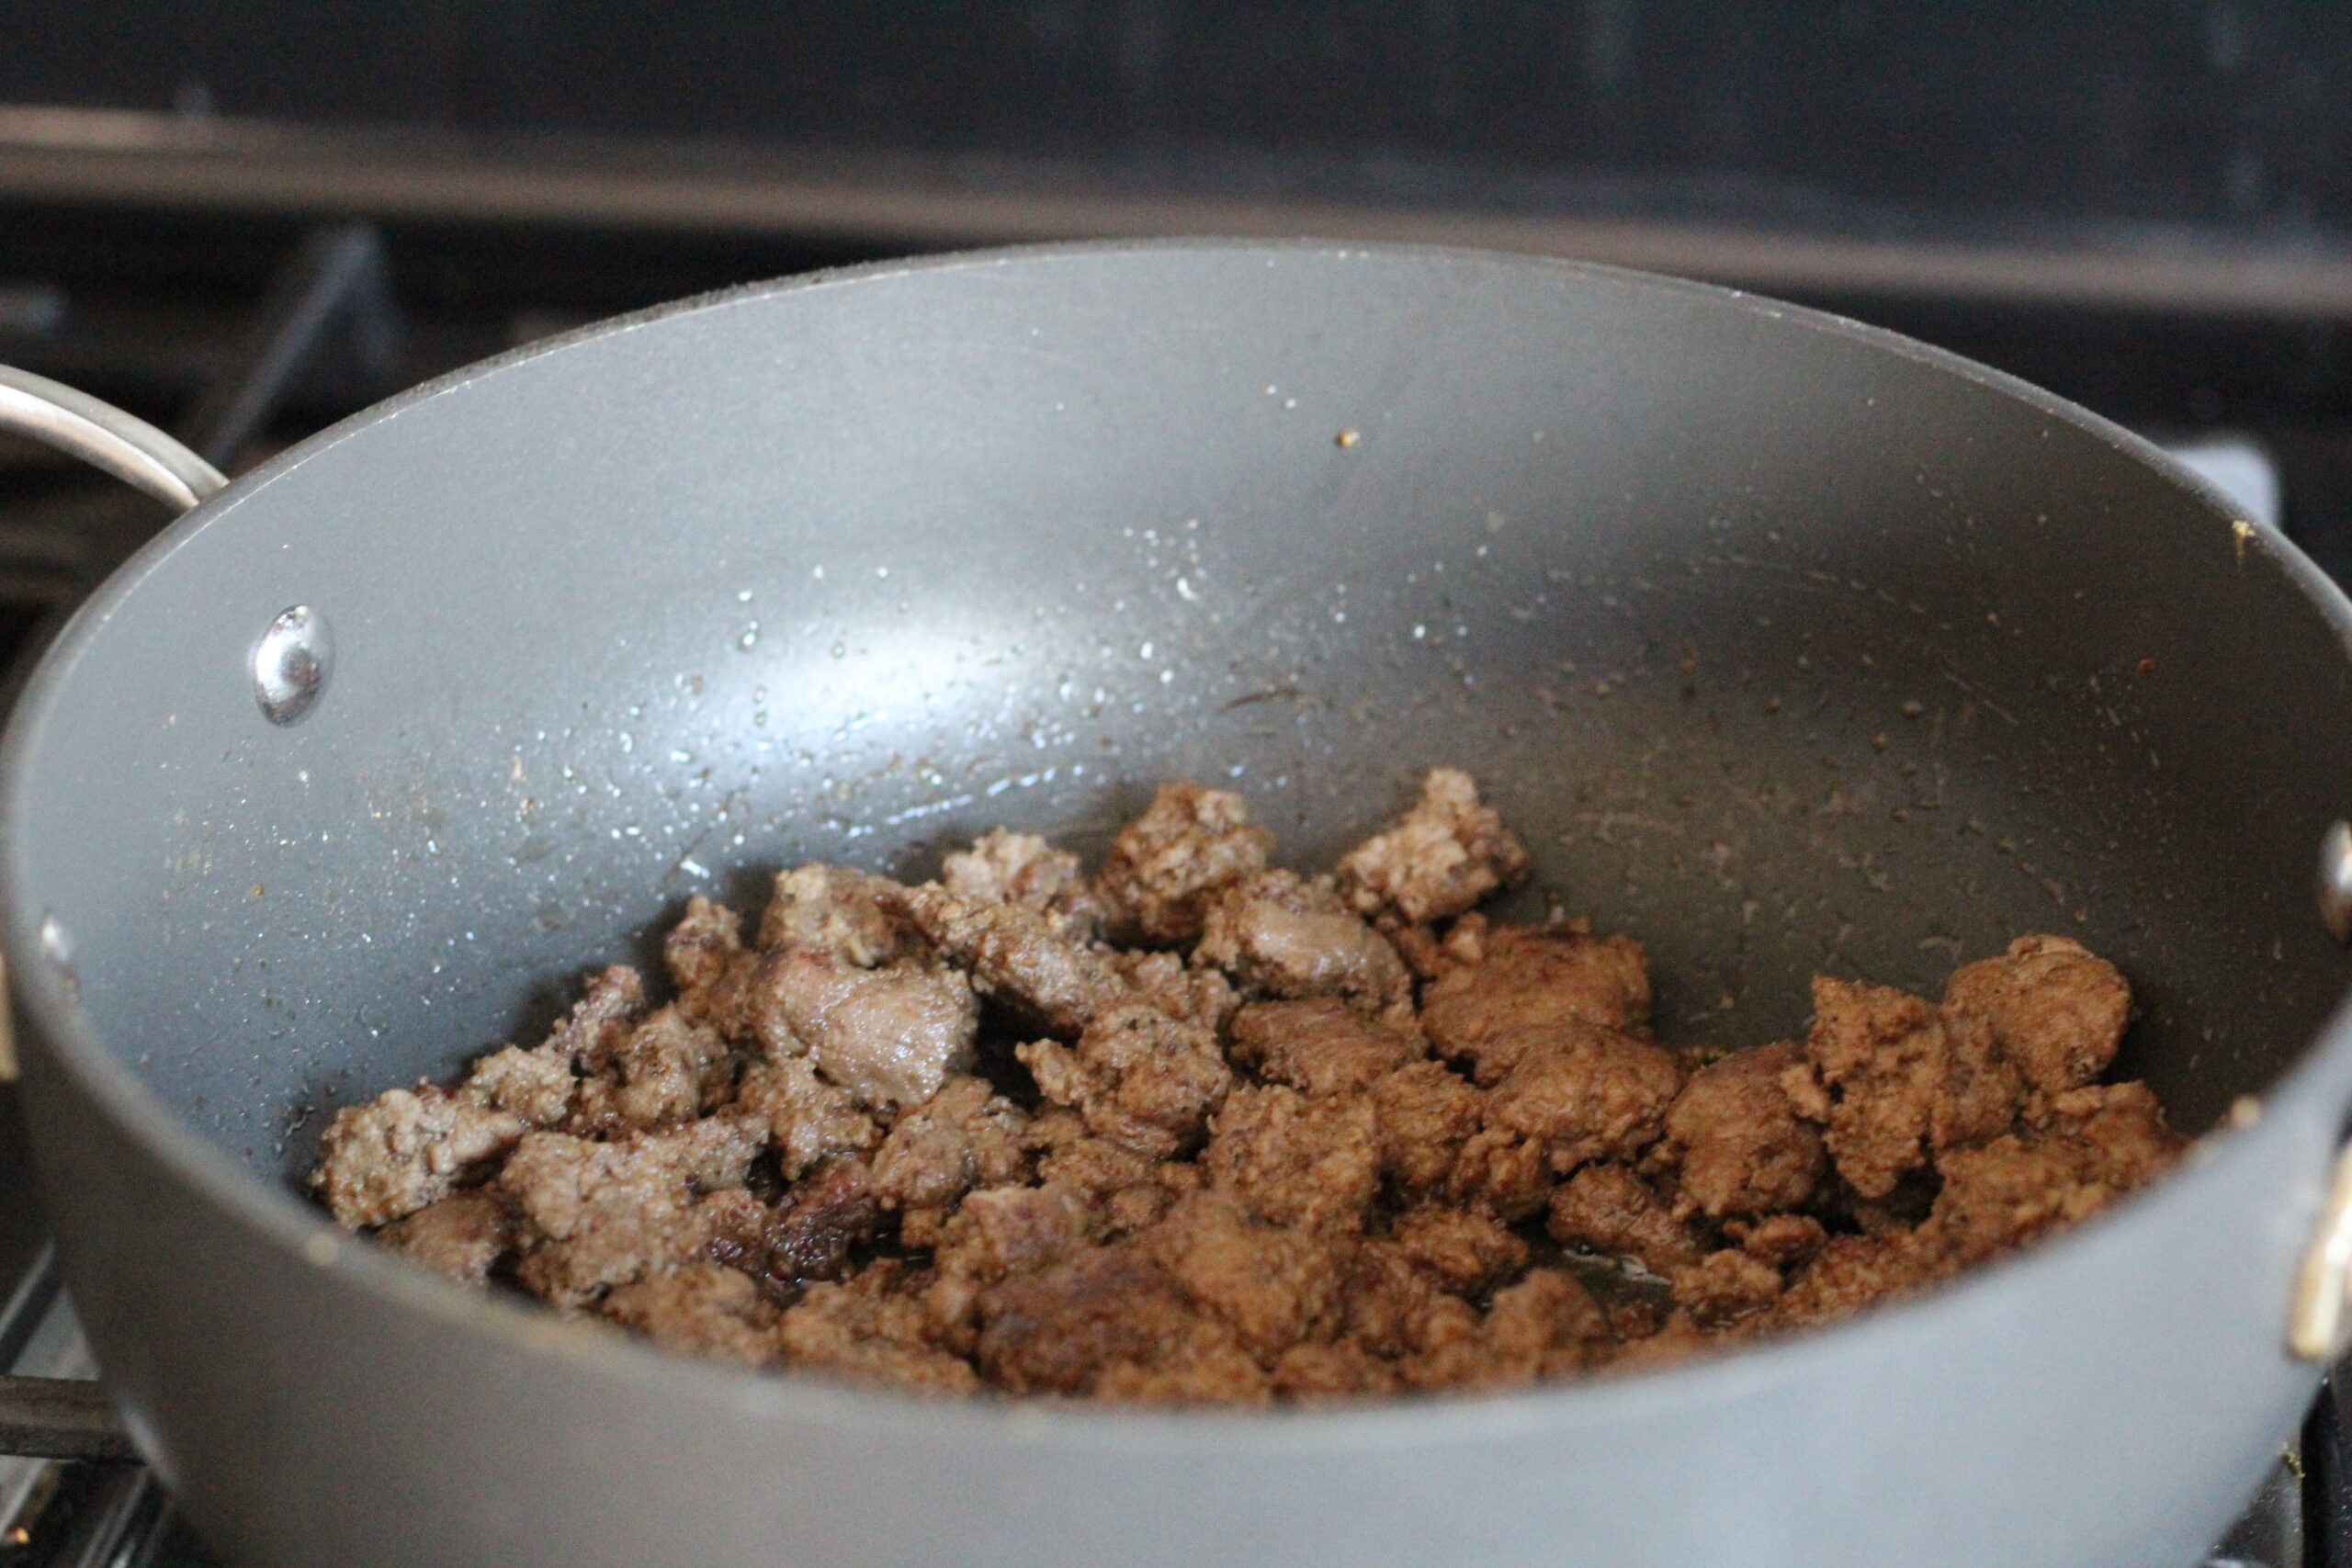 Cook the ground lamb